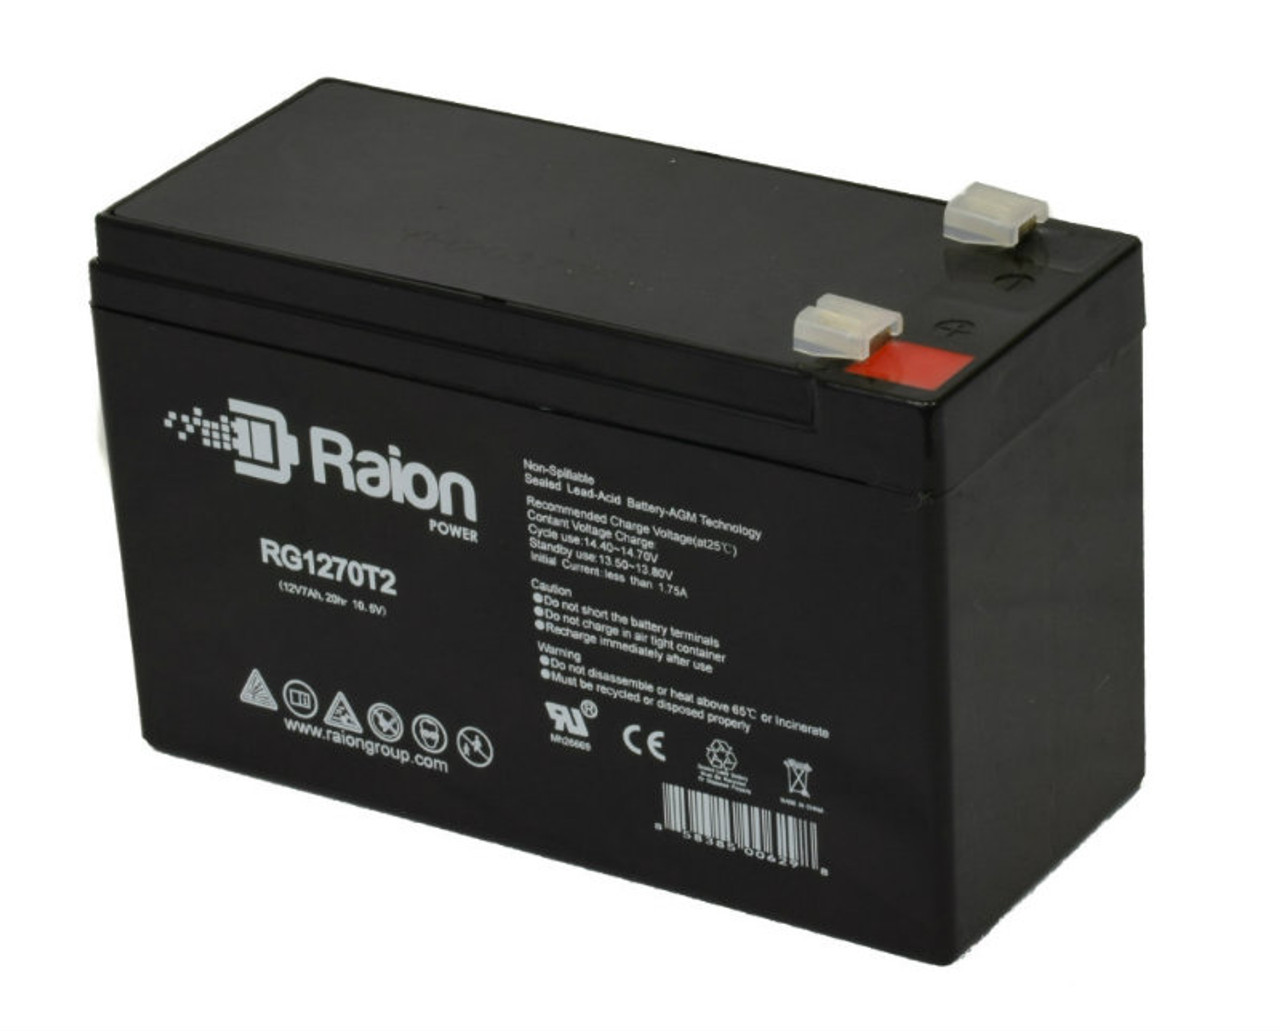 Raion Power RG1270T2 12V 7Ah Battery Used To Build you Compatible RBC12 Cartridge for APC RBC12